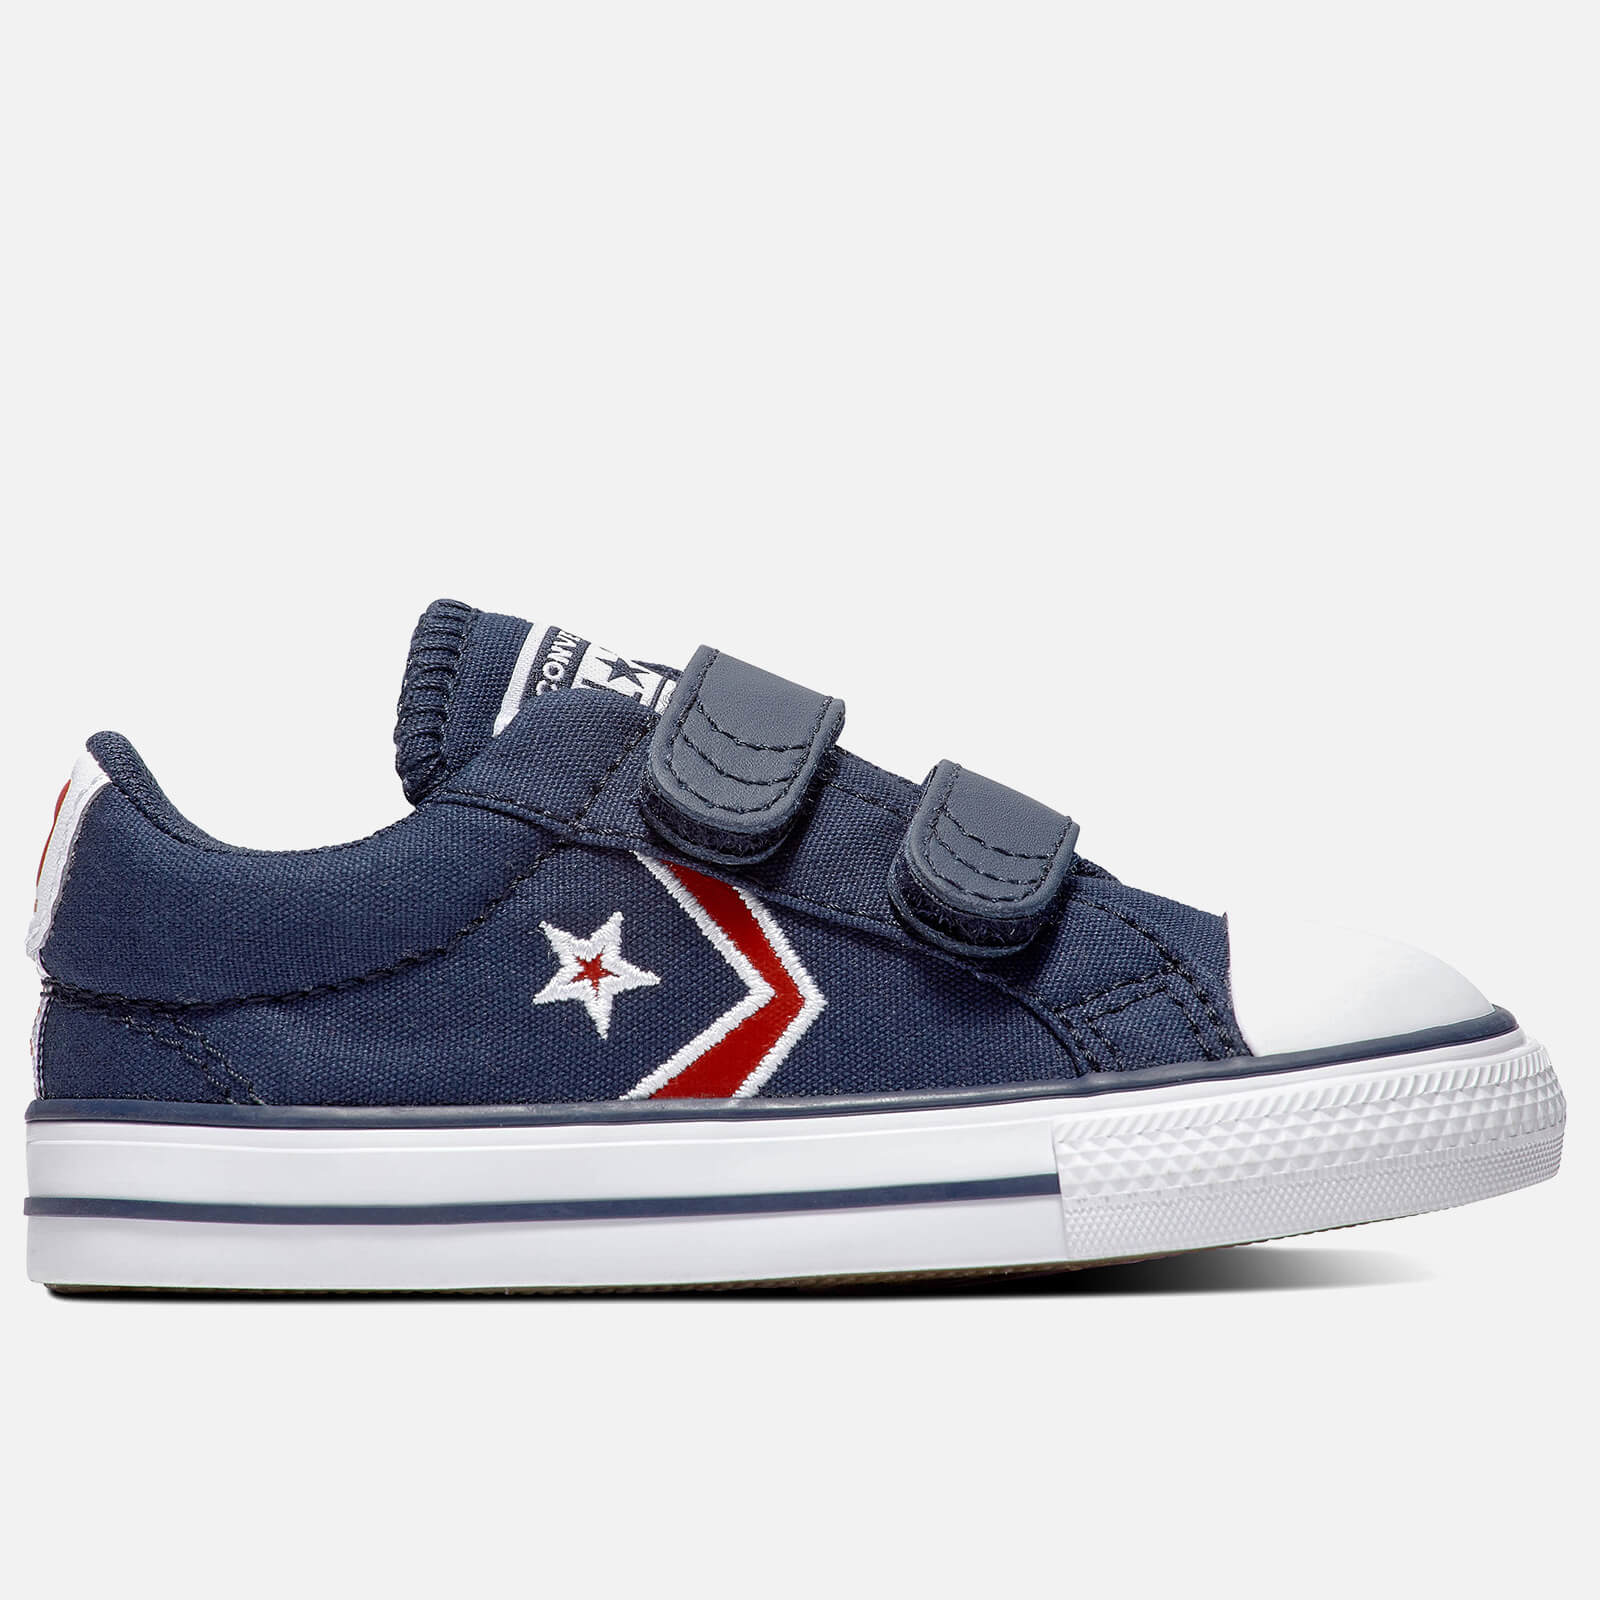 Converse Toddlers' Star Player Embroidered Ox Velcro Trainers - Obsidian/University Red - UK 4 Baby